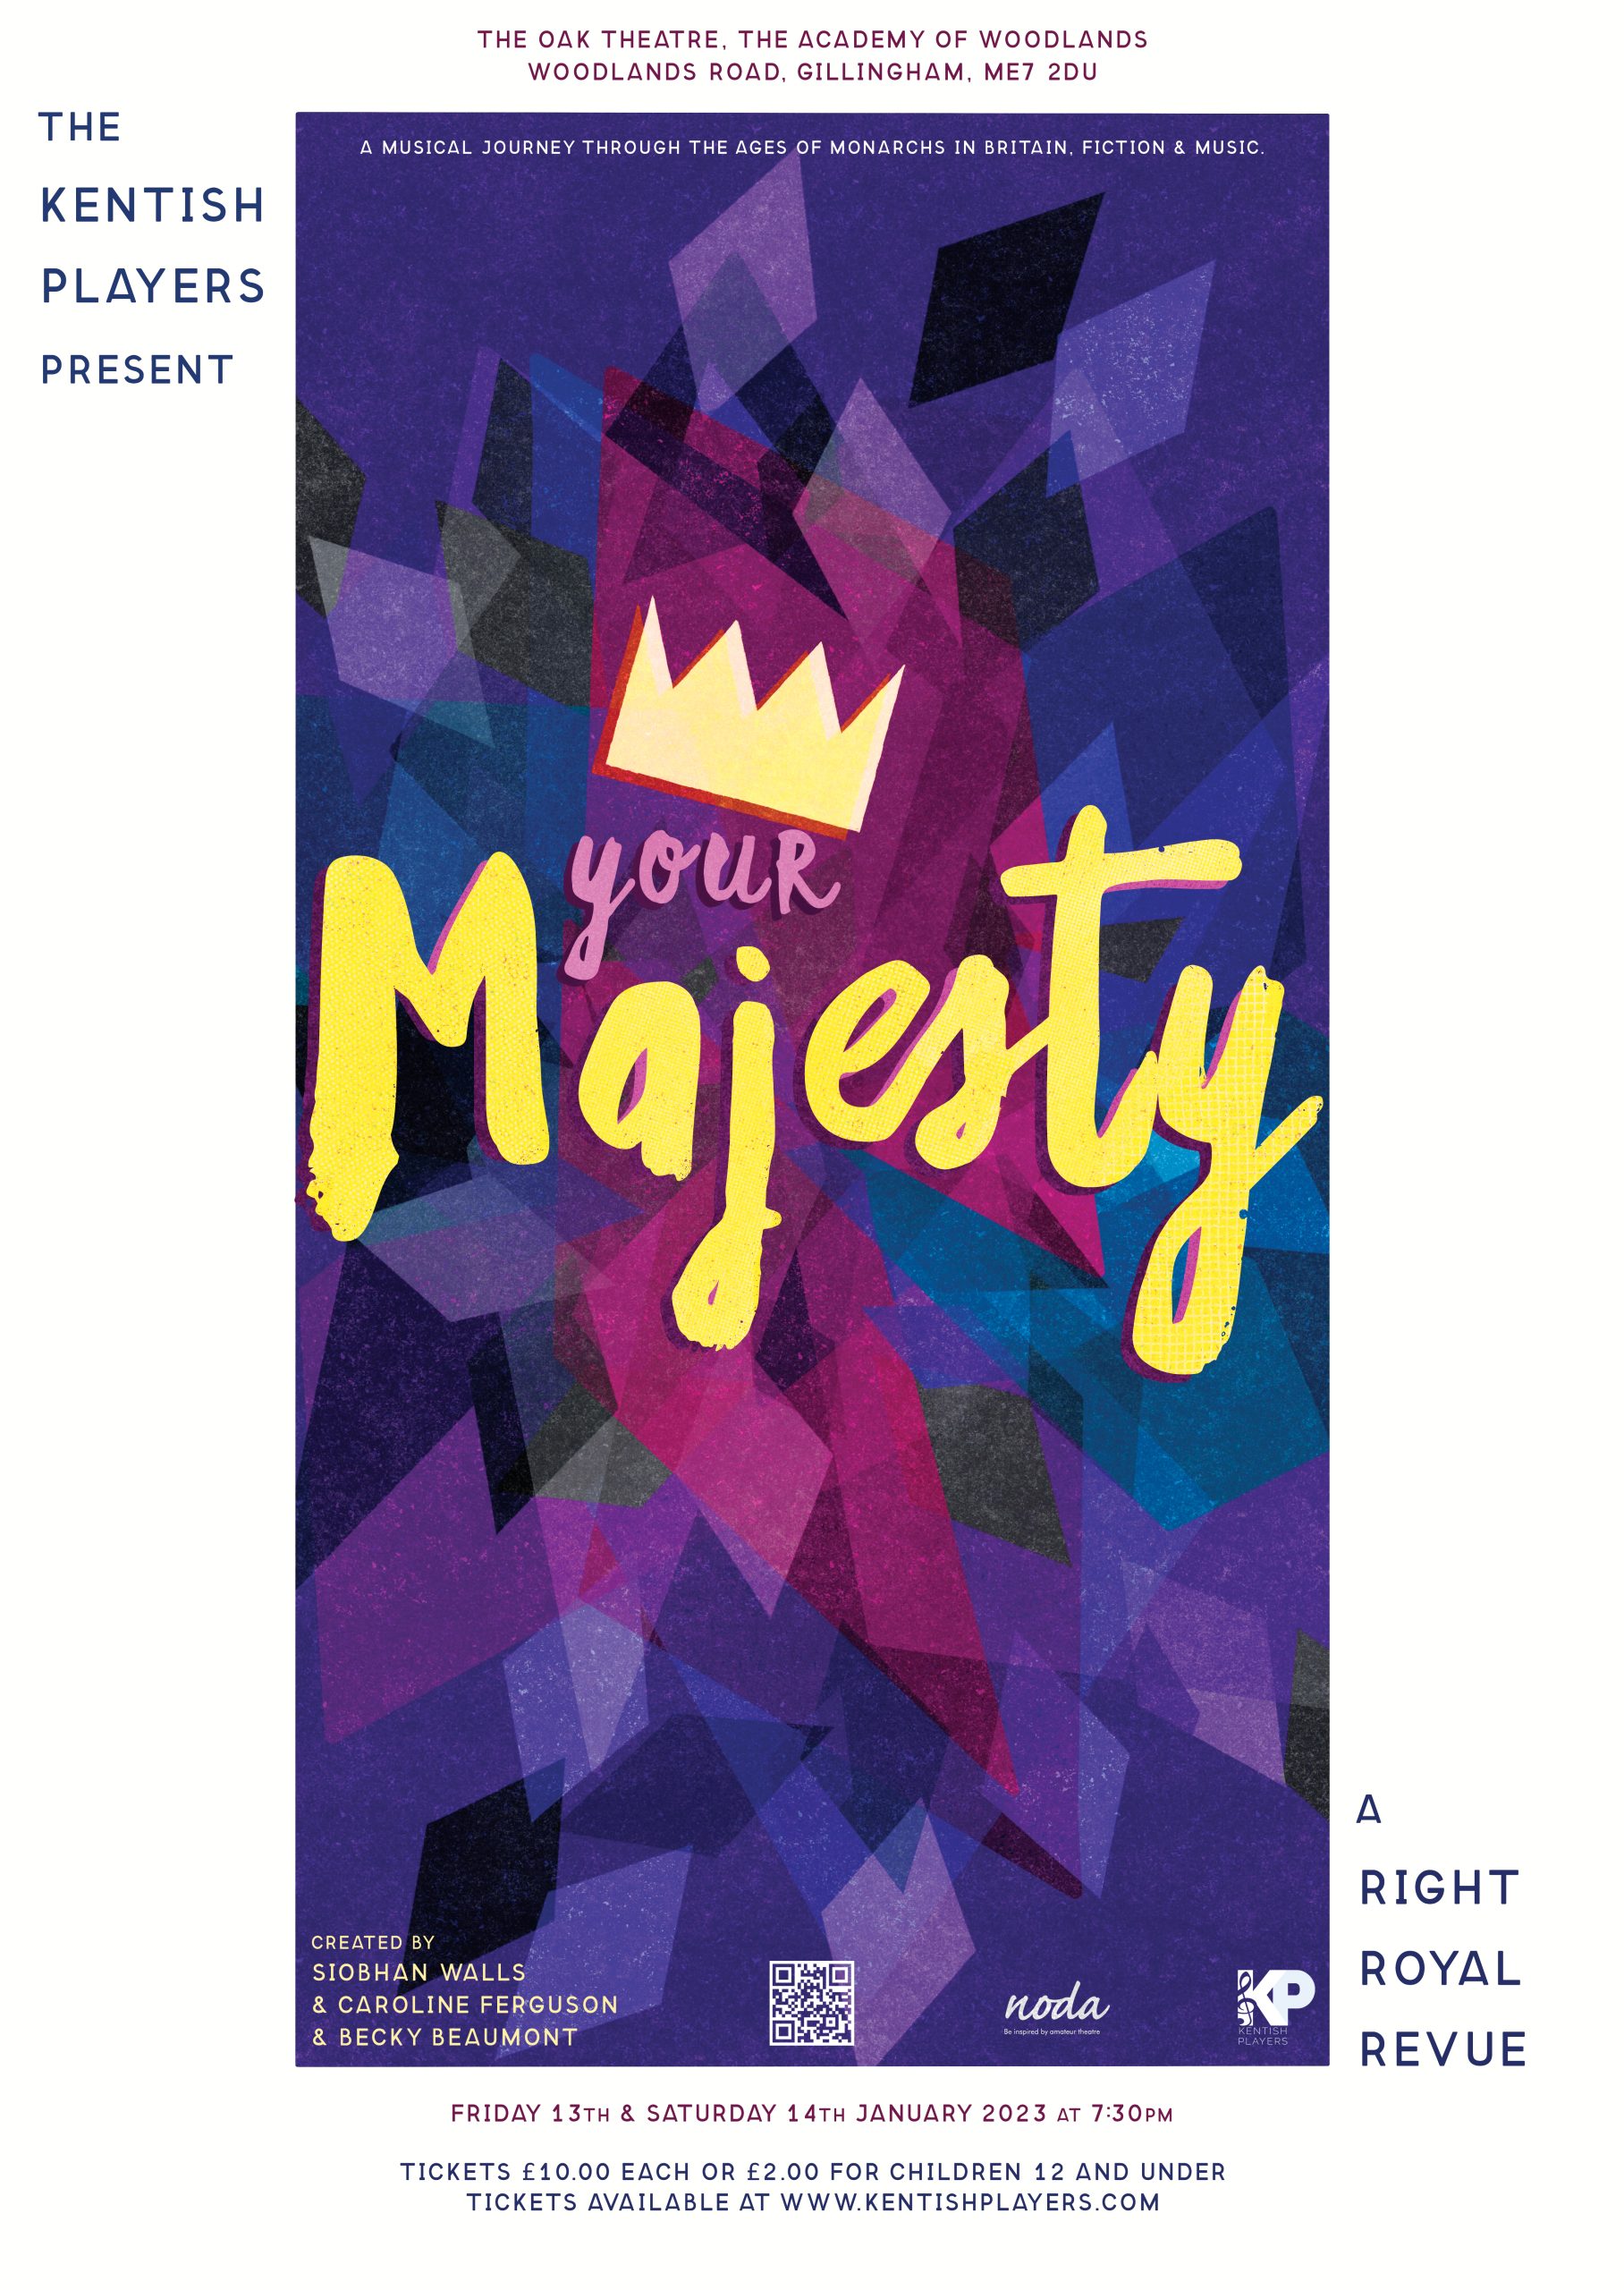 Your Majesty! A Right Royal Revue